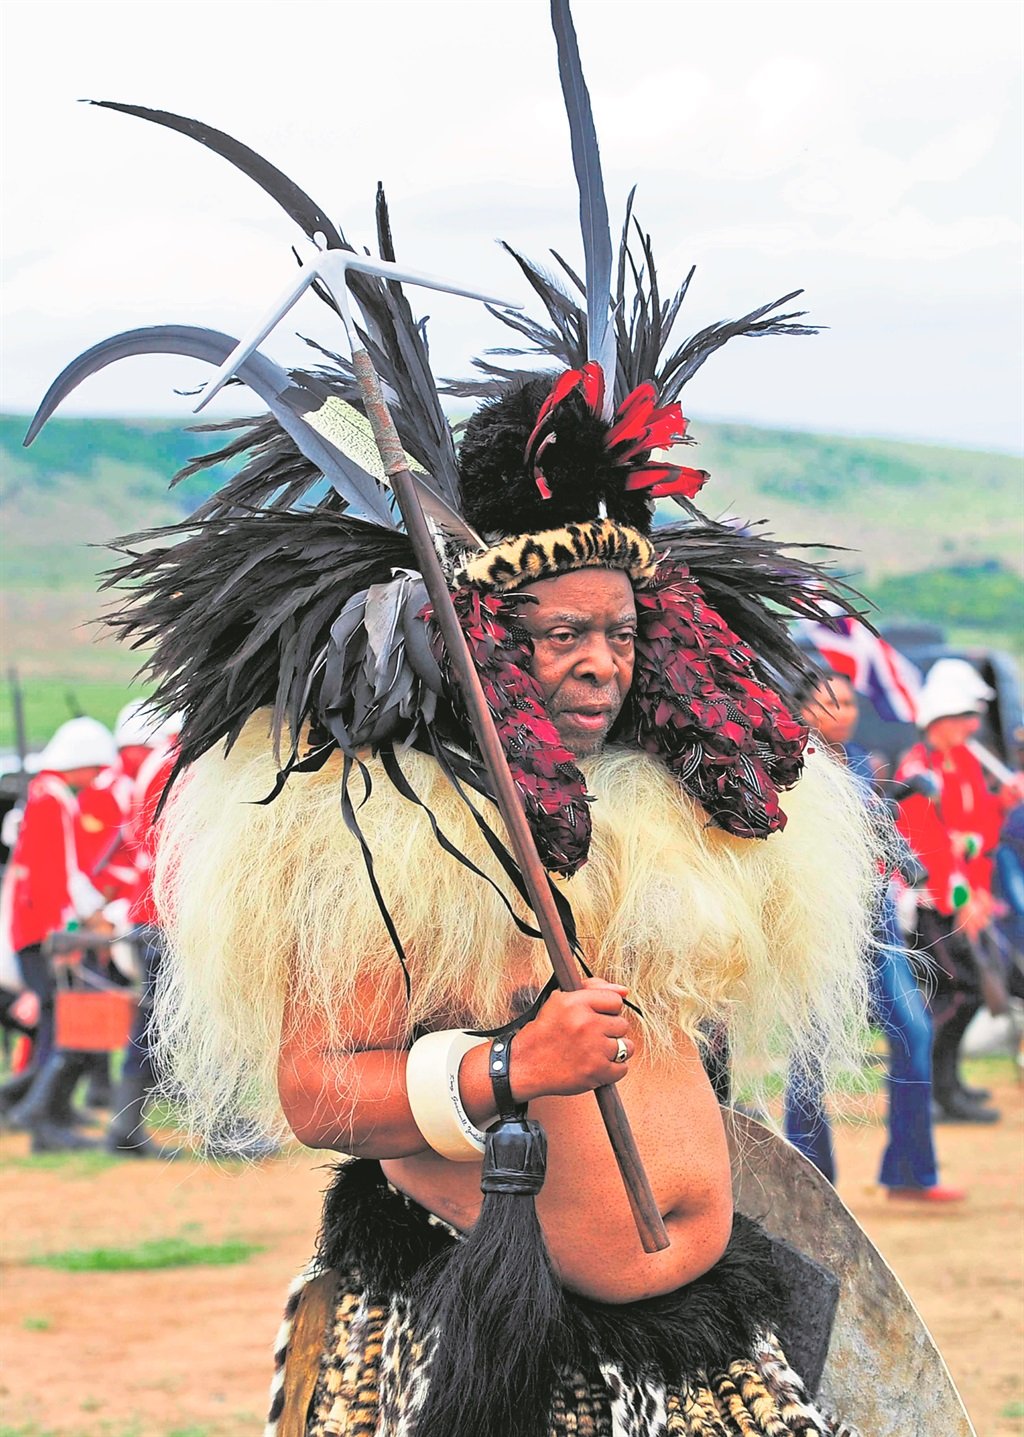 Zulu King Goodwill Zwelithini will receive his second honourary doctorate at the University of Zululand this week for combating social ills among the youth. The picture was taken in January 2016 during a re-enactment of the battle of Isandlwana in Nquthu, which the Zulus won in 1879, conquering the strongly armed British army. Picture: Tebogo Letsie